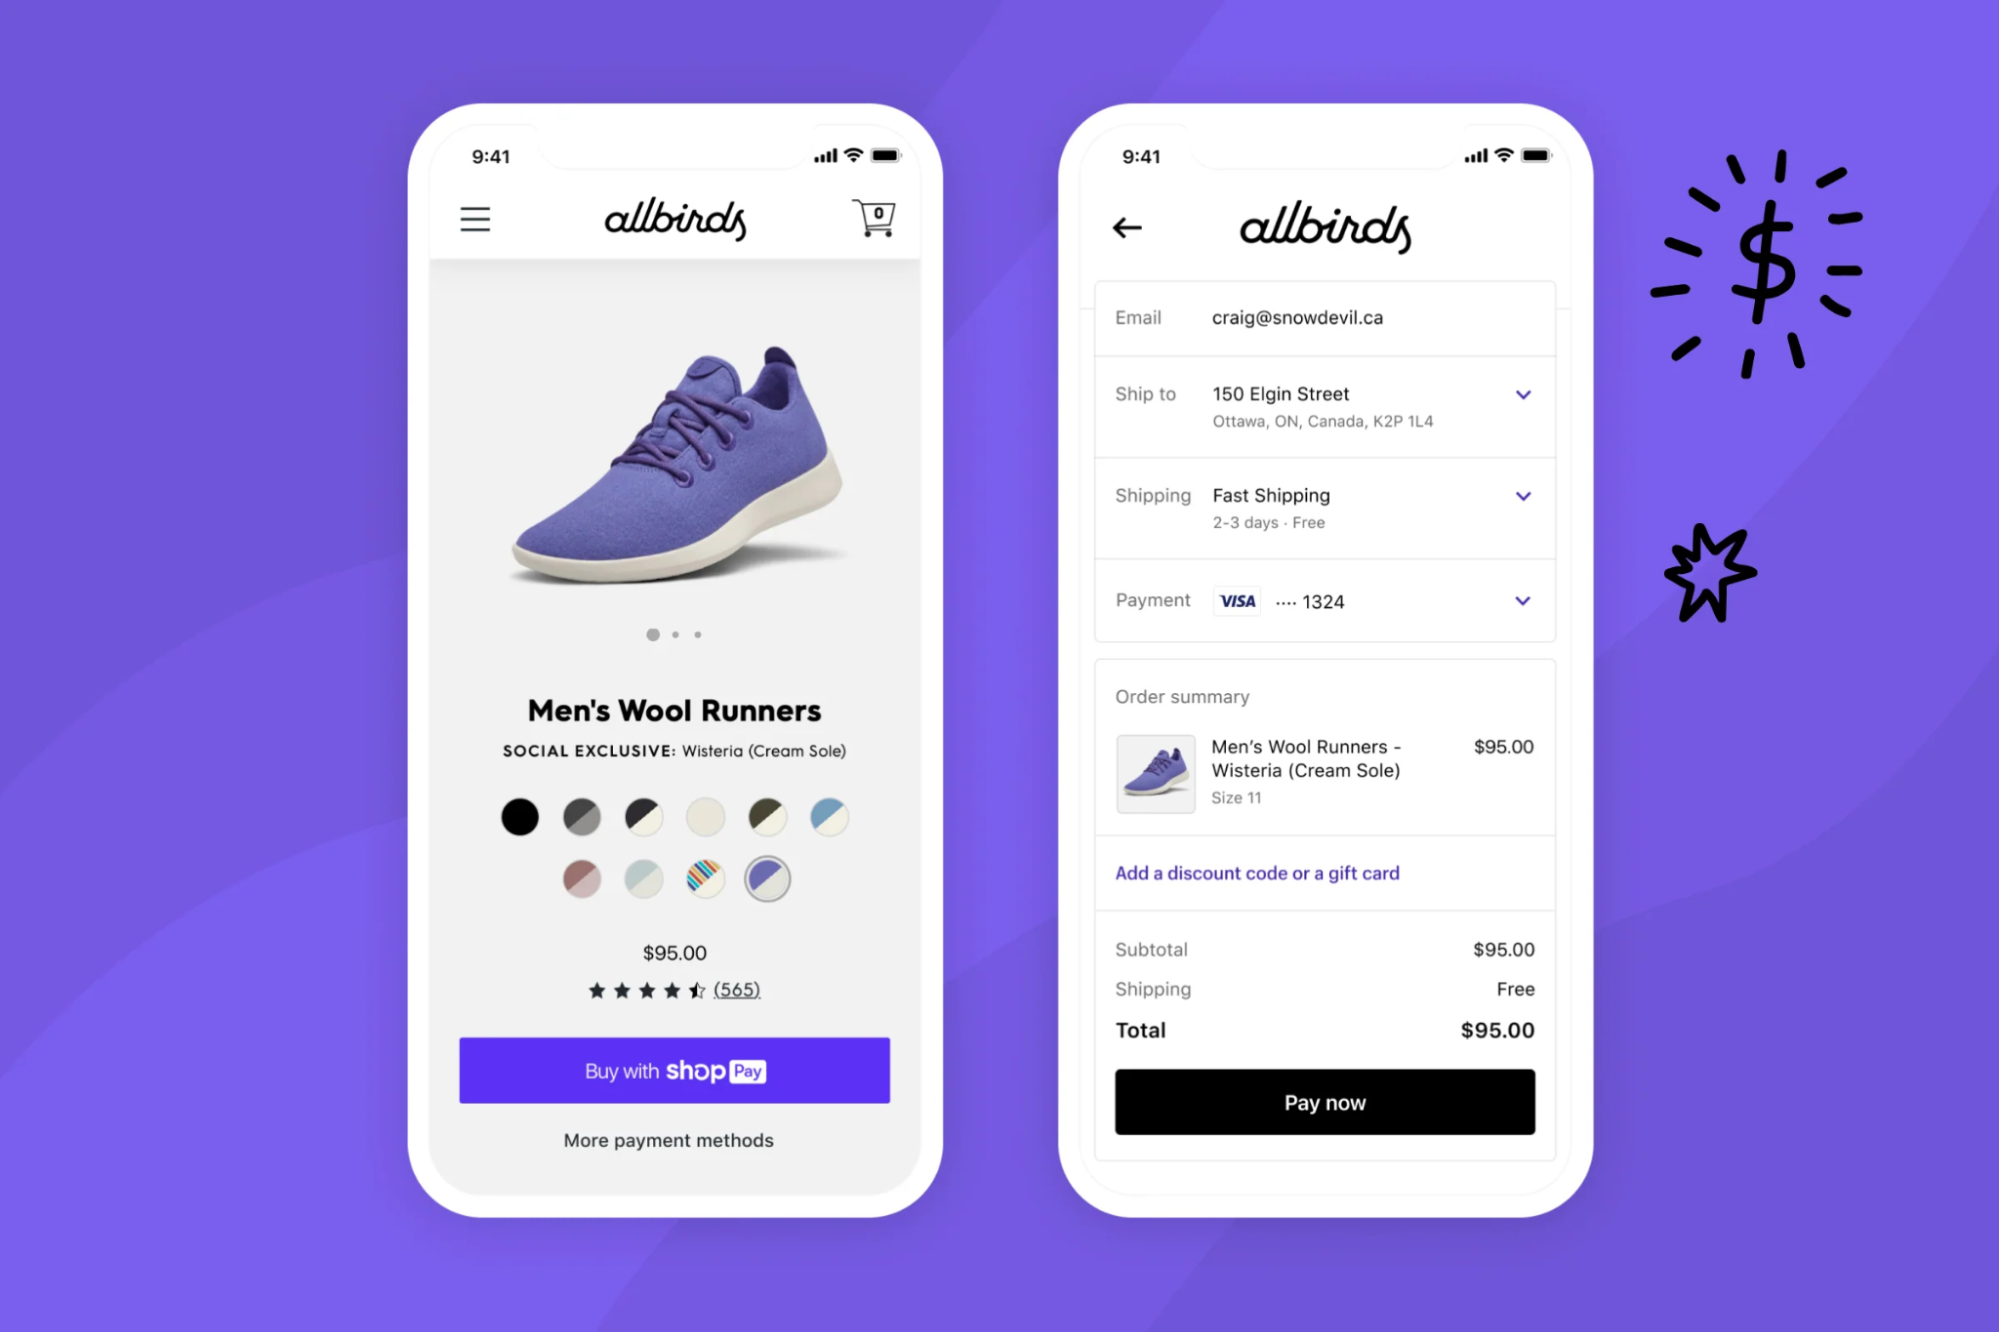 Image of checking out on Allbirds mobile website with Shop Pay